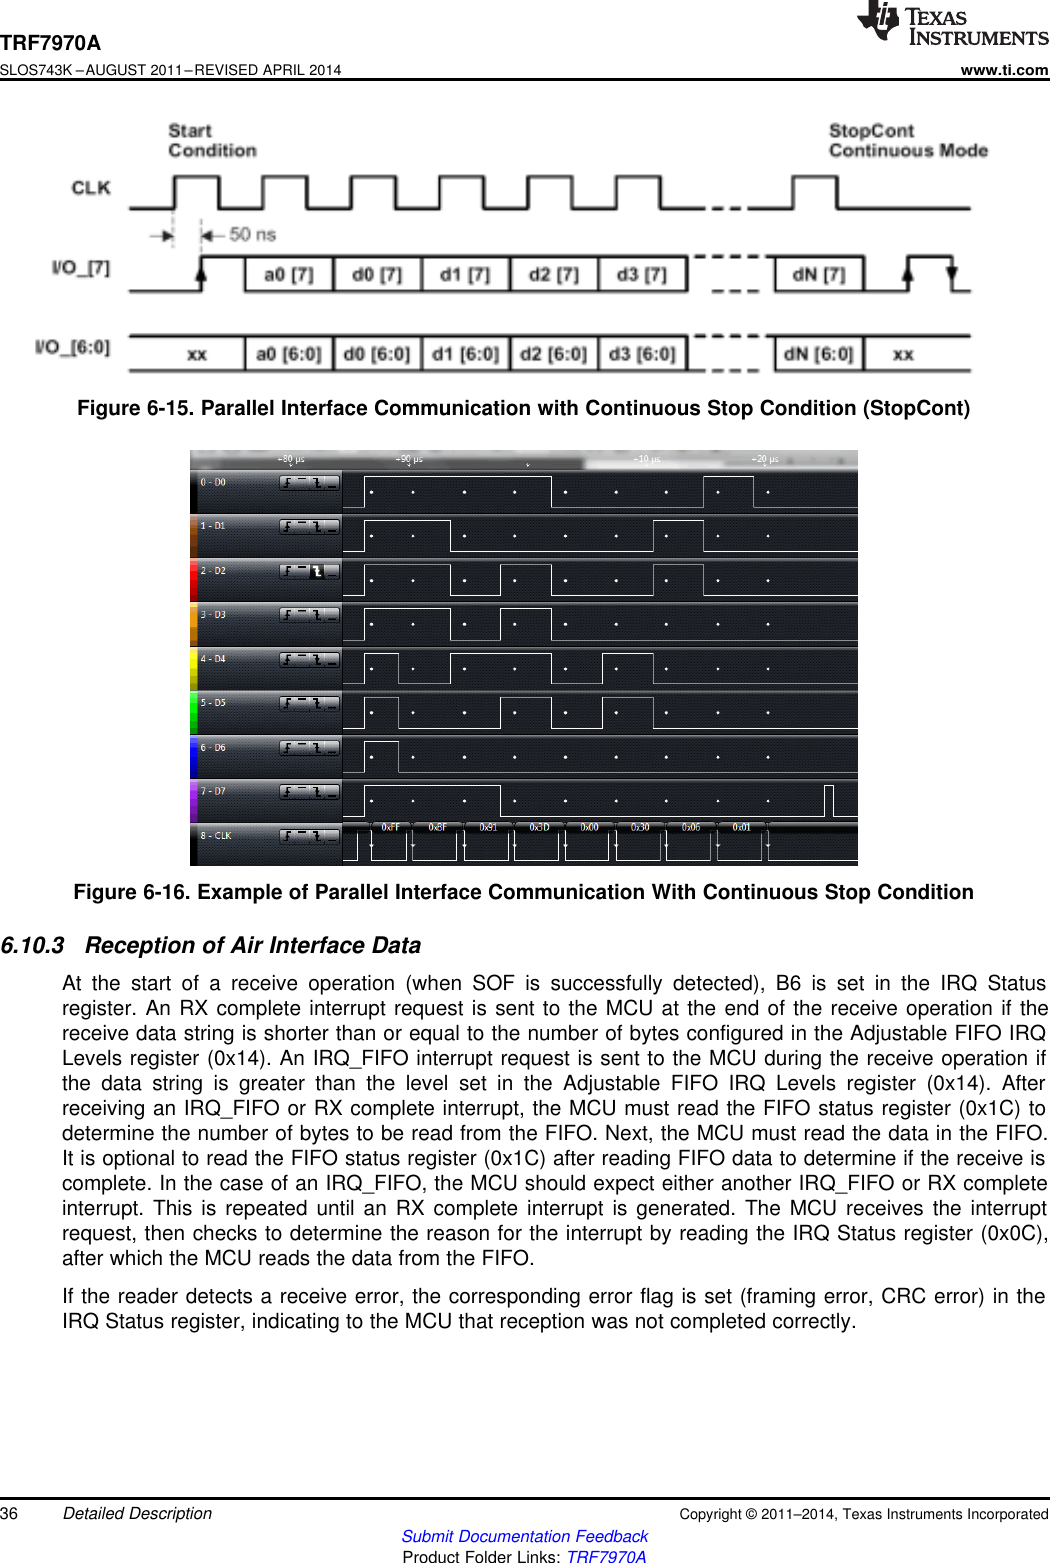 TRF7970ASLOS743K –AUGUST 2011–REVISED APRIL 2014www.ti.comFigure 6-15. Parallel Interface Communication with Continuous Stop Condition (StopCont)Figure 6-16. Example of Parallel Interface Communication With Continuous Stop Condition6.10.3 Reception of Air Interface DataAt the start of a receive operation (when SOF is successfully detected), B6 is set in the IRQ Statusregister. An RX complete interrupt request is sent to the MCU at the end of the receive operation if thereceive data string is shorter than or equal to the number of bytes configured in the Adjustable FIFO IRQLevels register (0x14). An IRQ_FIFO interrupt request is sent to the MCU during the receive operation ifthe data string is greater than the level set in the Adjustable FIFO IRQ Levels register (0x14). Afterreceiving an IRQ_FIFO or RX complete interrupt, the MCU must read the FIFO status register (0x1C) todetermine the number of bytes to be read from the FIFO. Next, the MCU must read the data in the FIFO.It is optional to read the FIFO status register (0x1C) after reading FIFO data to determine if the receive iscomplete. In the case of an IRQ_FIFO, the MCU should expect either another IRQ_FIFO or RX completeinterrupt. This is repeated until an RX complete interrupt is generated. The MCU receives the interruptrequest, then checks to determine the reason for the interrupt by reading the IRQ Status register (0x0C),after which the MCU reads the data from the FIFO.If the reader detects a receive error, the corresponding error flag is set (framing error, CRC error) in theIRQ Status register, indicating to the MCU that reception was not completed correctly.36 Detailed Description Copyright © 2011–2014, Texas Instruments IncorporatedSubmit Documentation FeedbackProduct Folder Links: TRF7970A